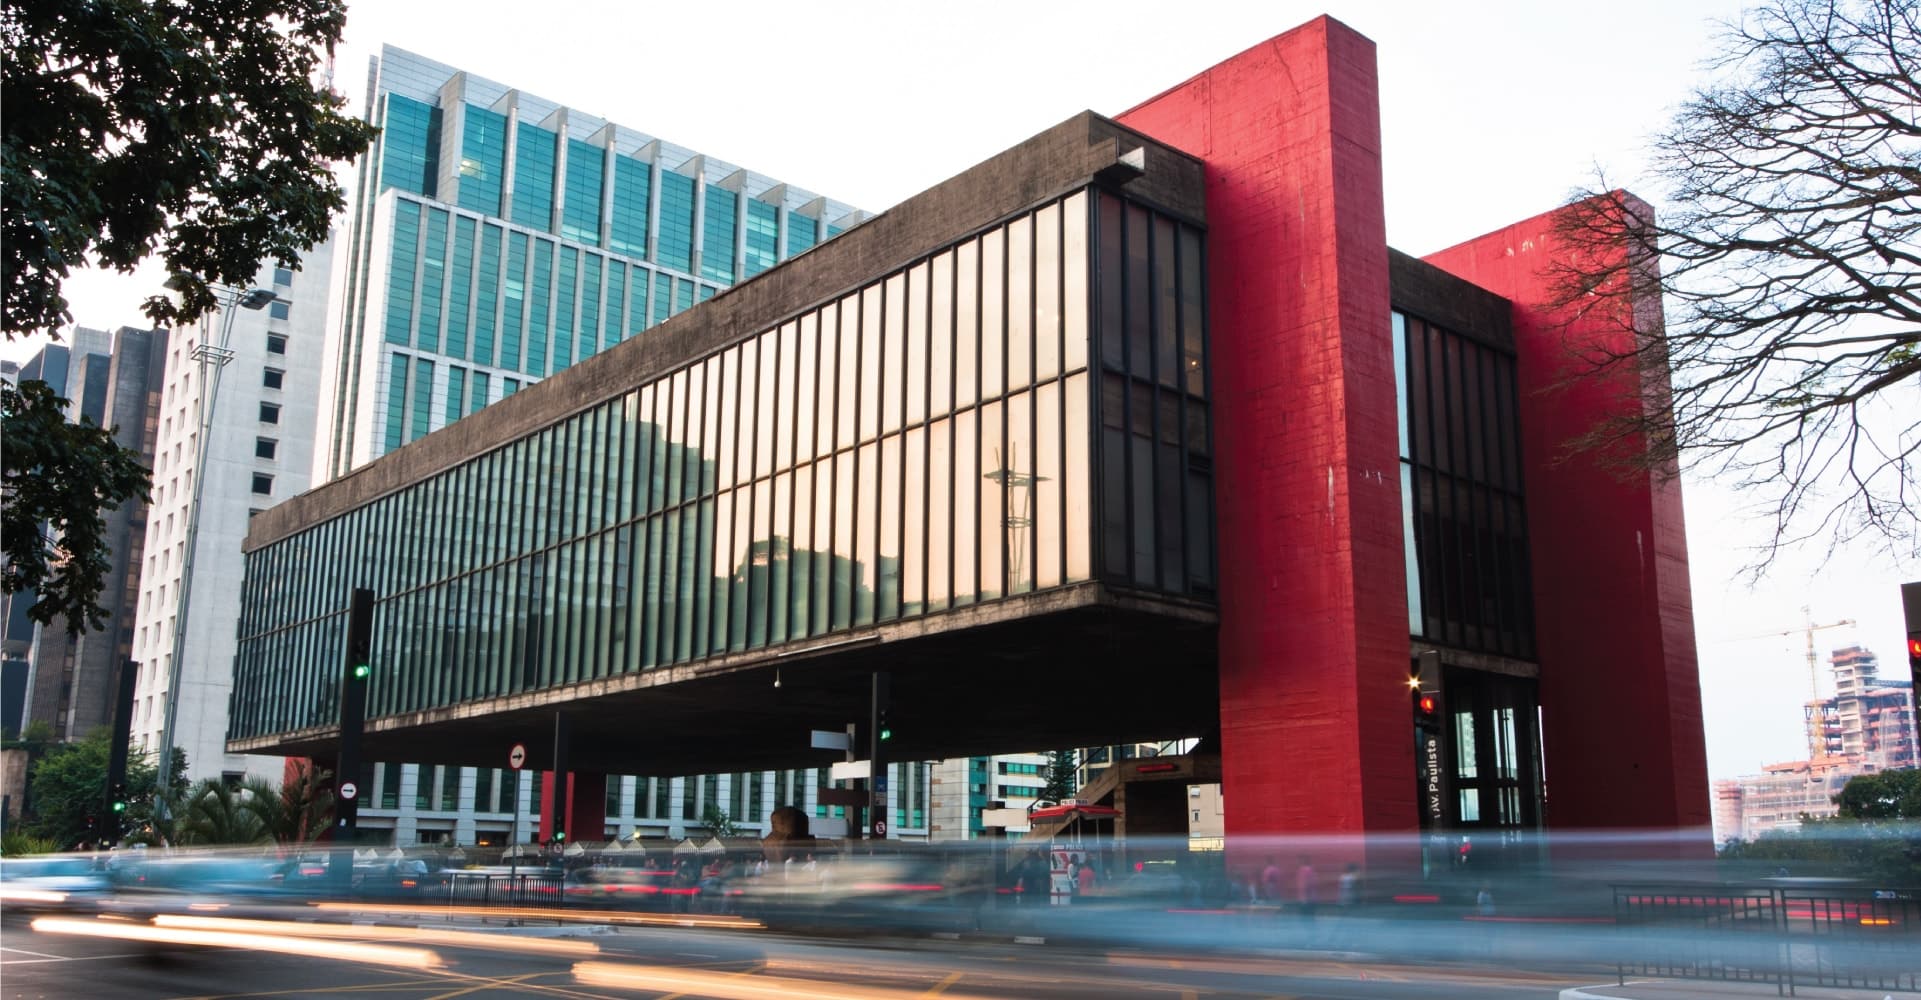 exterior of entire masp museum, glass box with red pillars